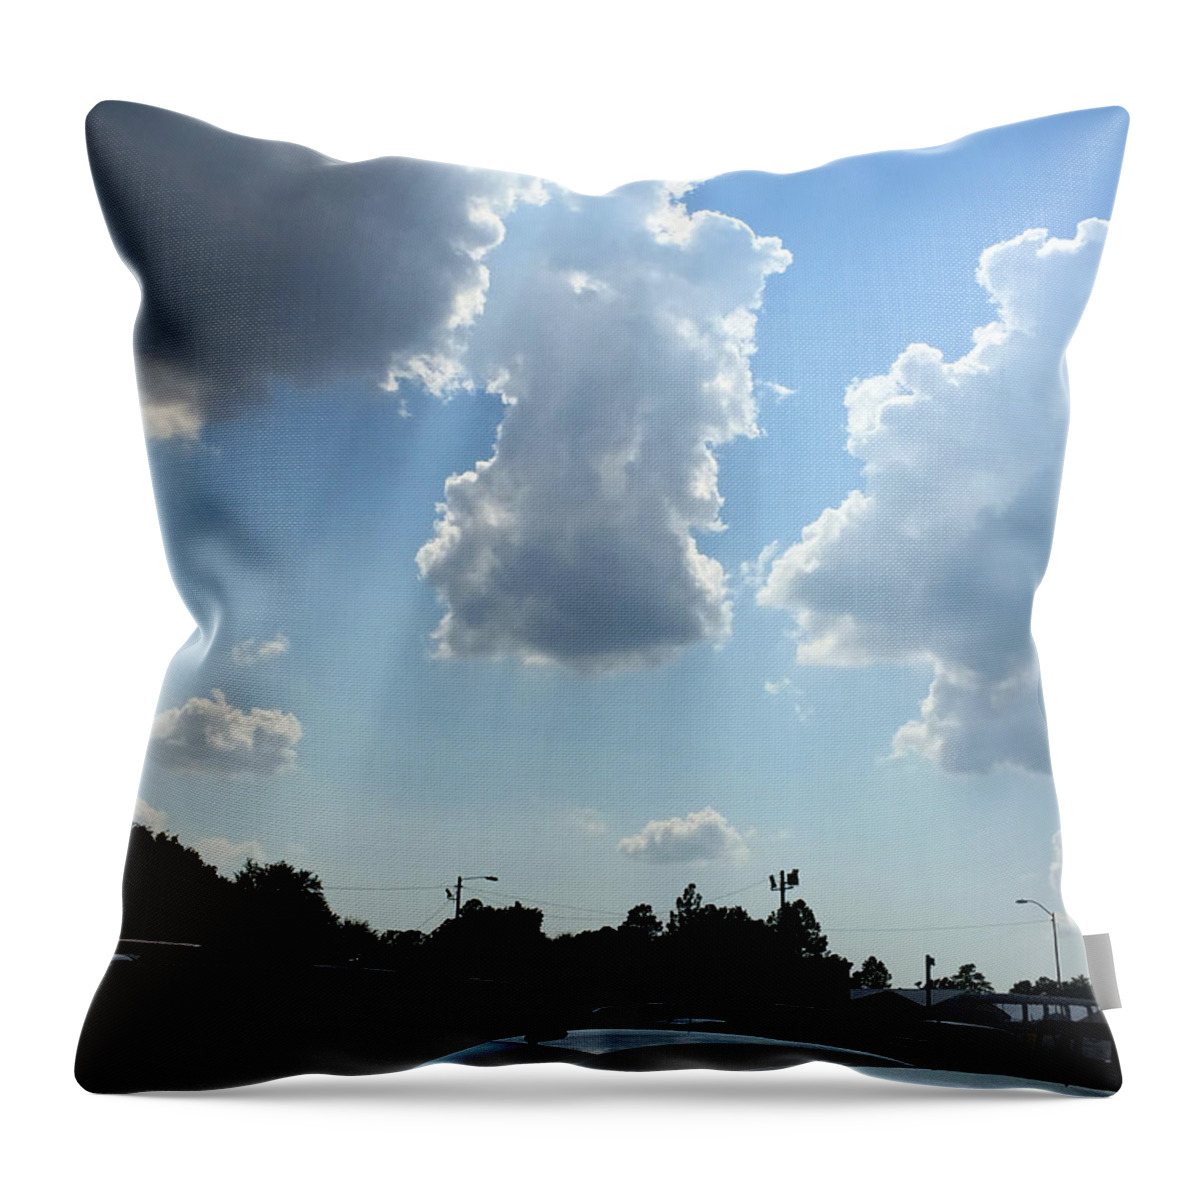 Angel Throw Pillow featuring the photograph Grace Of The Angels by Matthew Seufer